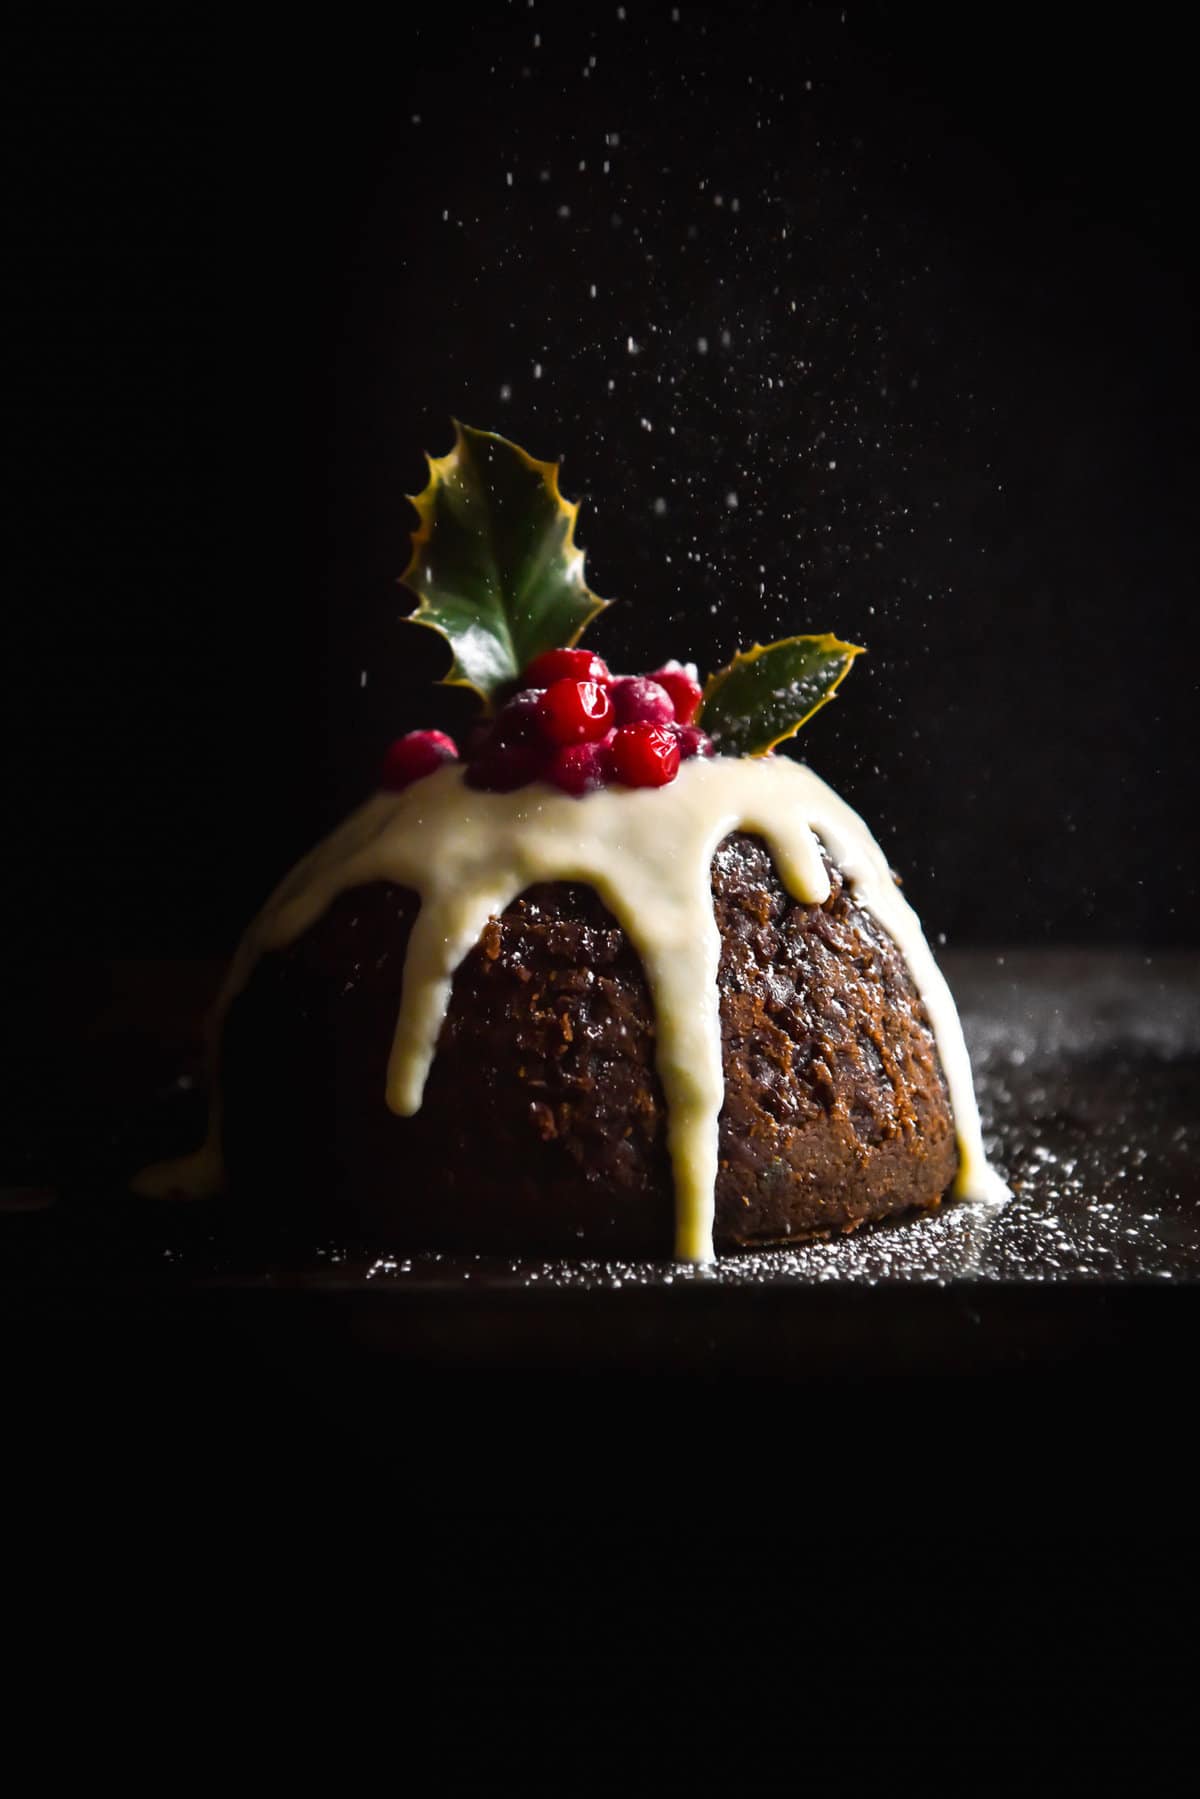 Fruit free Christmas pudding that is gluten free, grain free and adaptable to be dairy free. Perfect for all your 'free-from' friends and family this Christmas. Recipe from www.georgeats.com | @georgeats